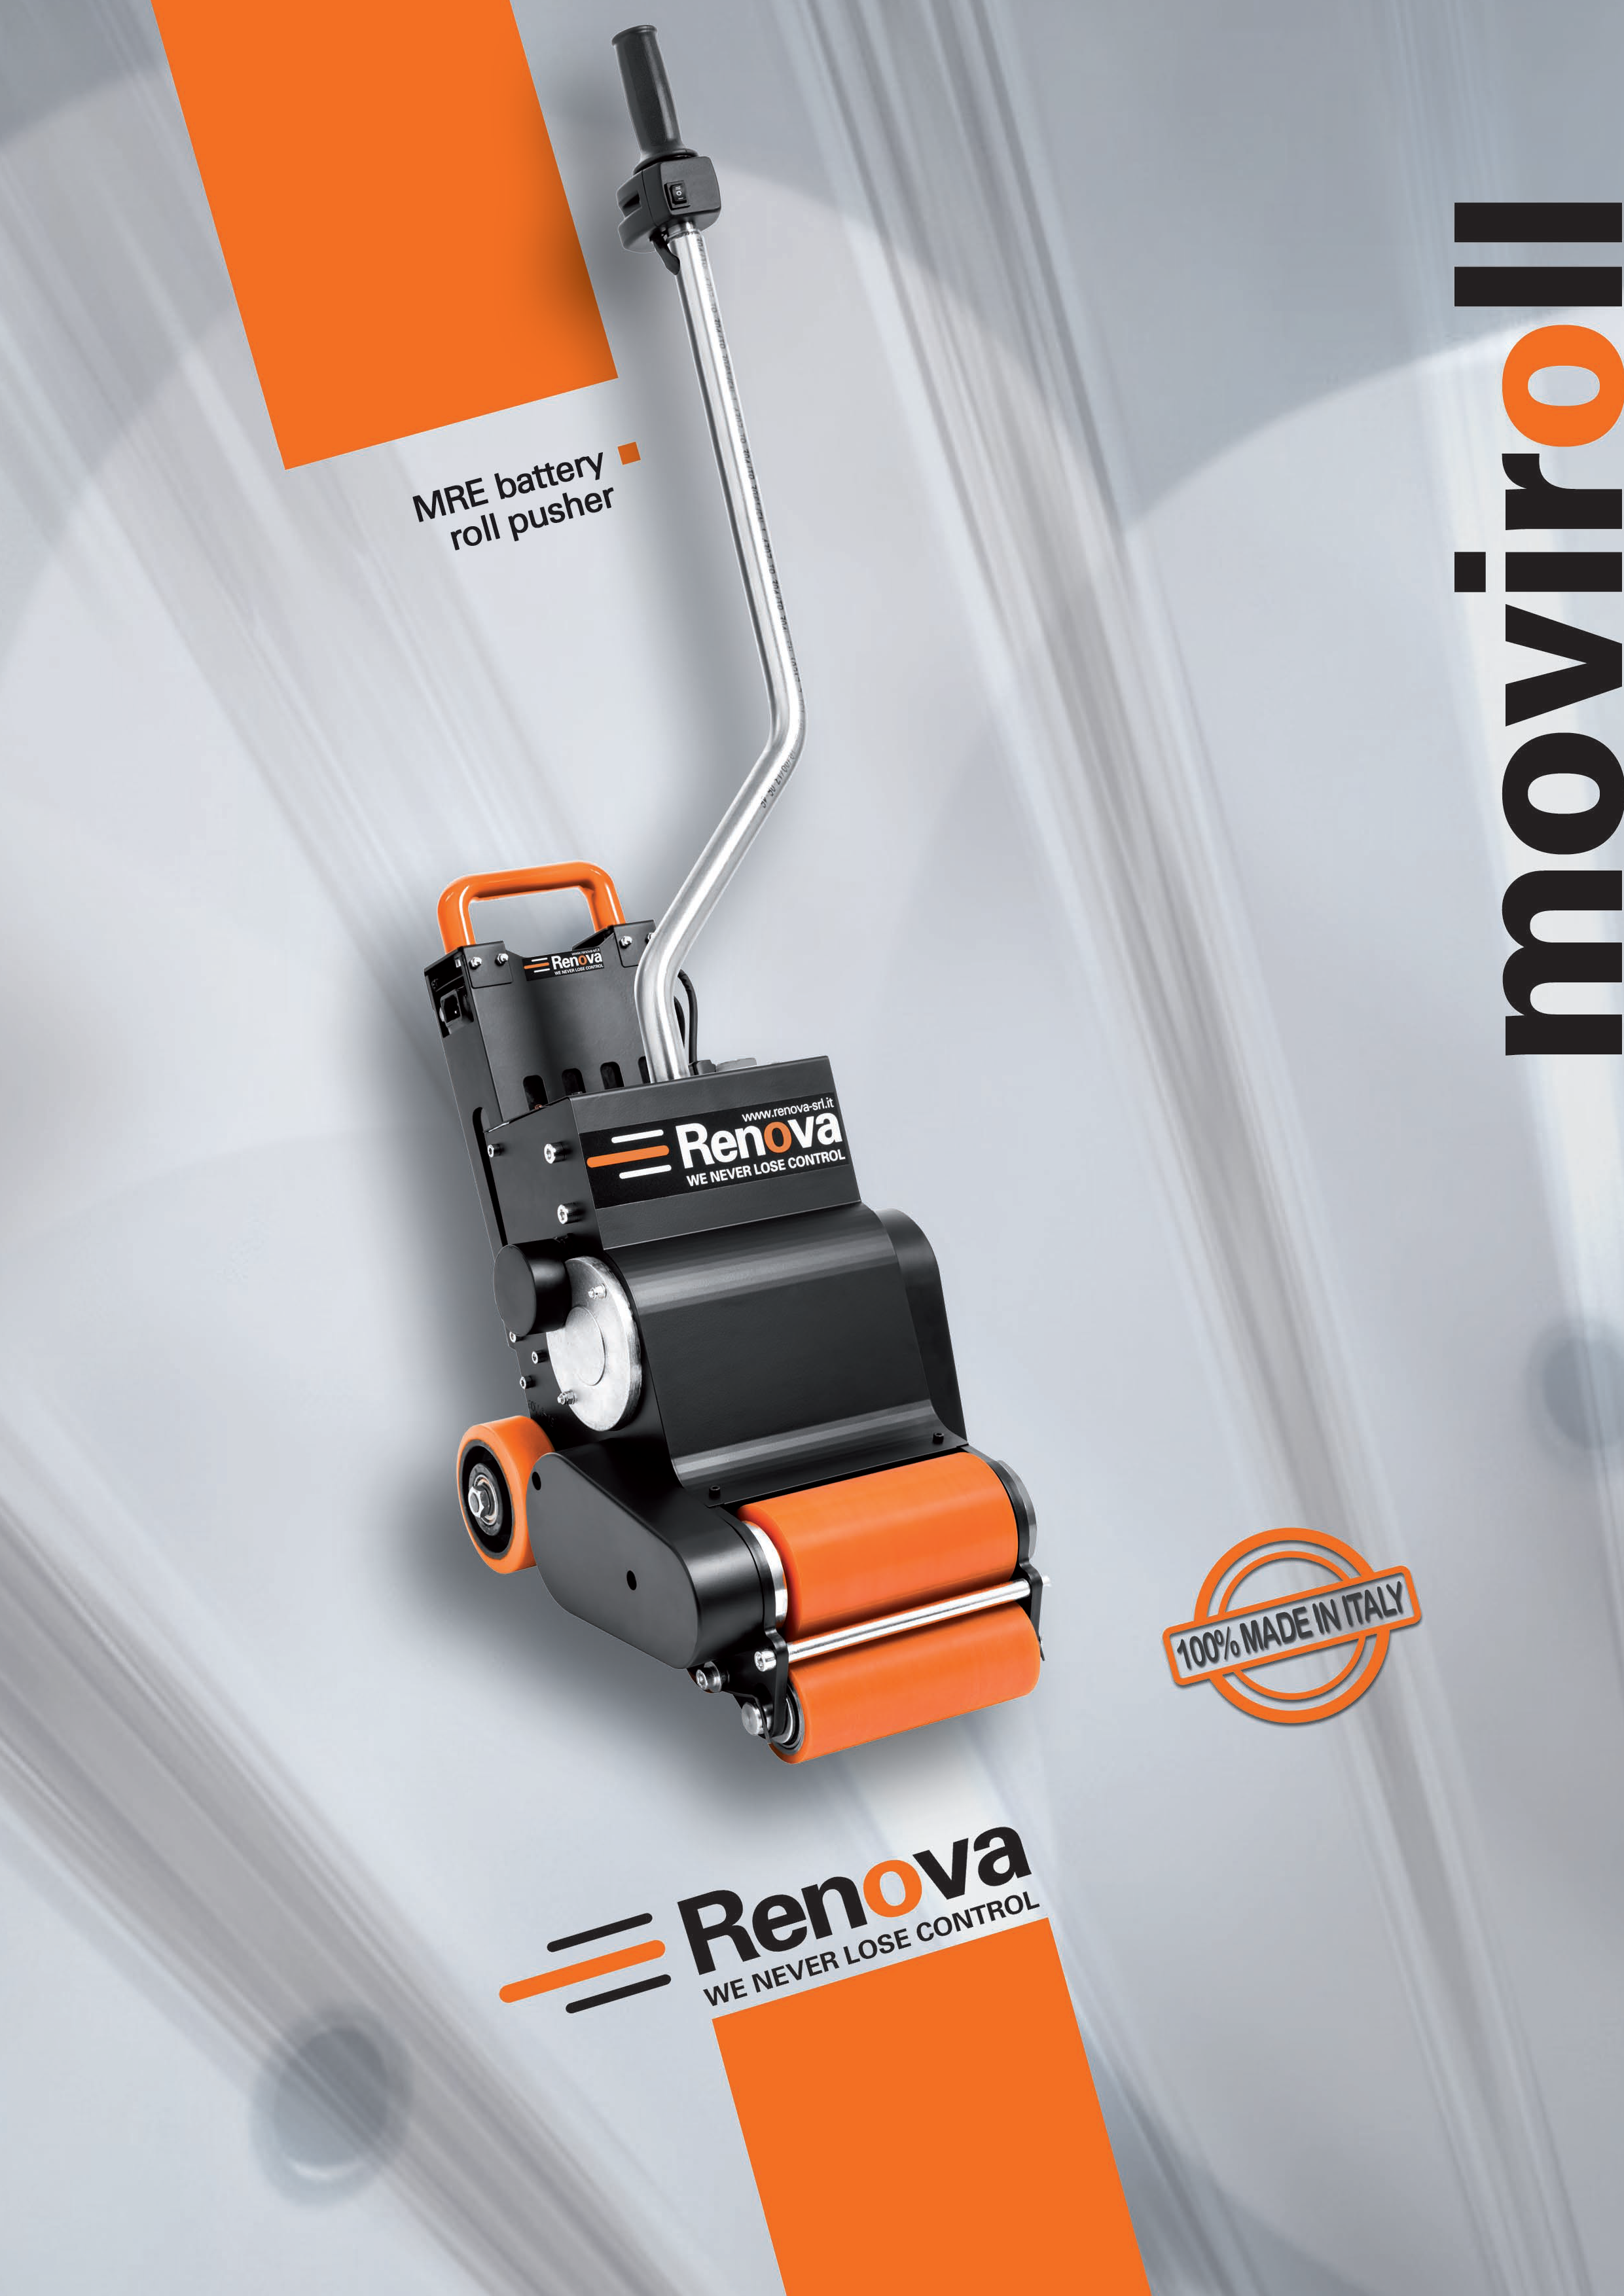 Read more about roll moving equipment in the battery roll pusher brochure